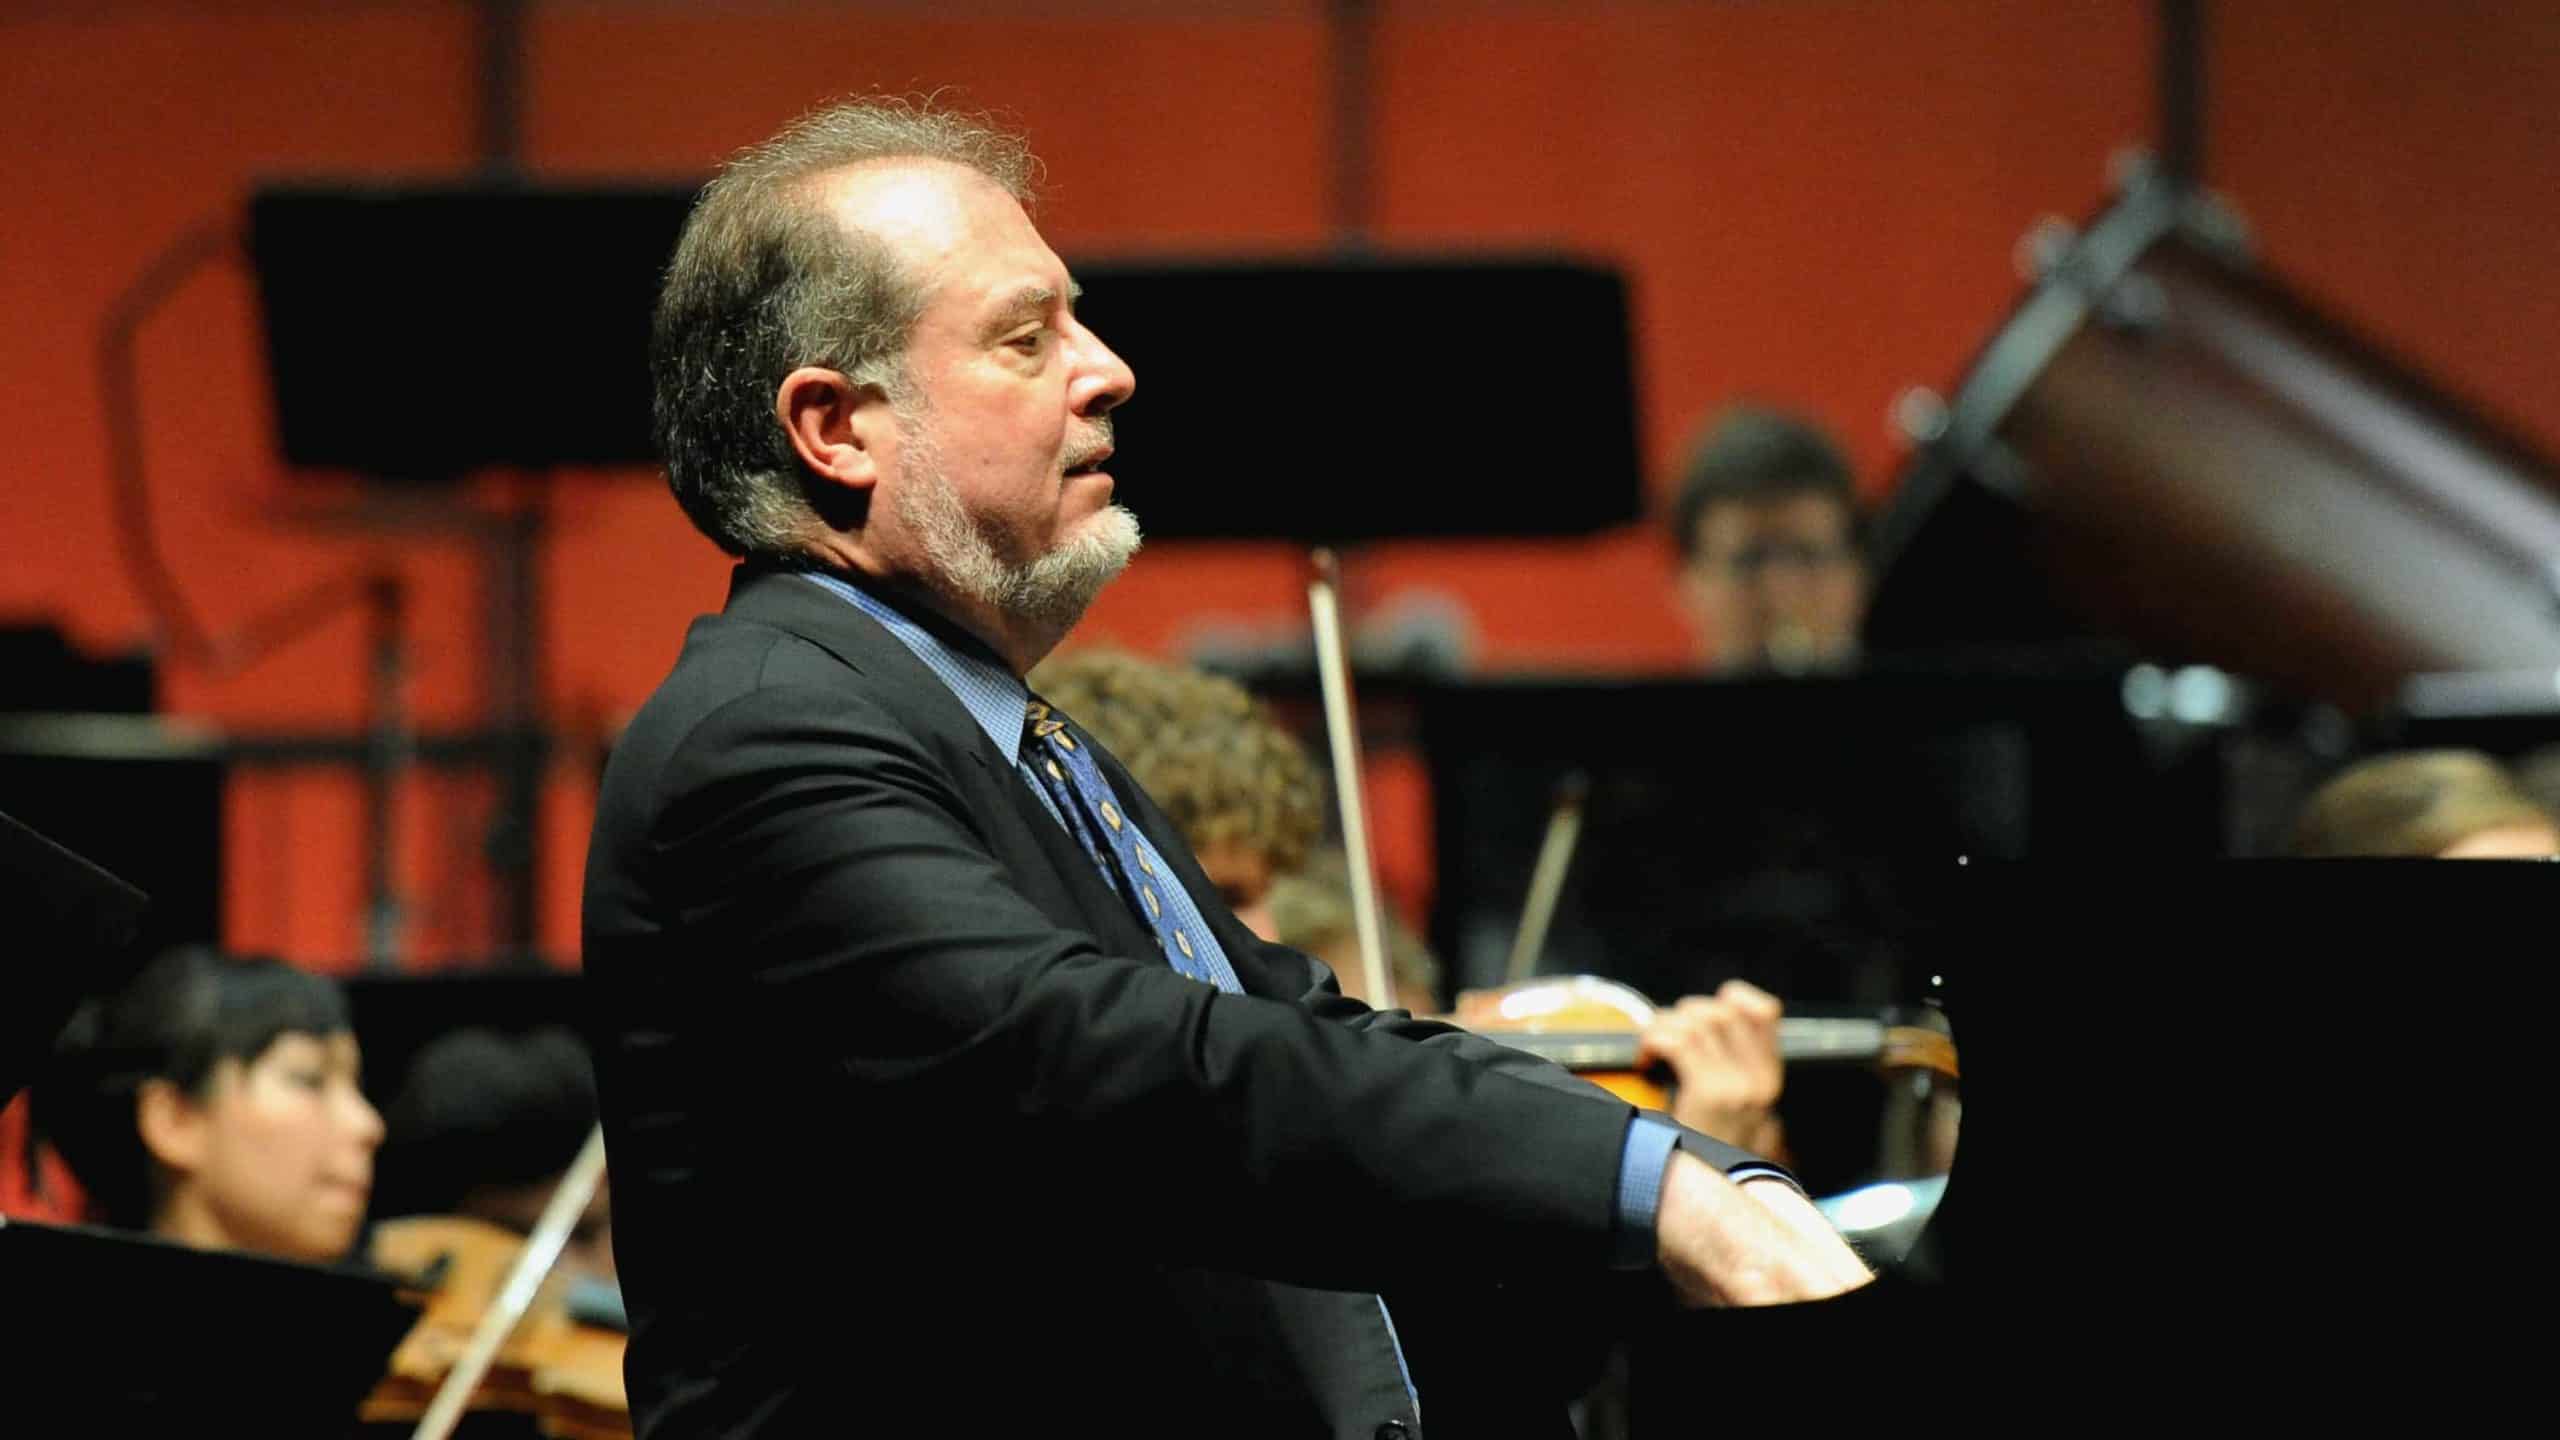 In a series of four performances, internationally acclaimed pianist Garrick Ohlsson will perform Brahms' Complete Works for Piano. Press photo courtesy of the Boston Symphony Orchestra